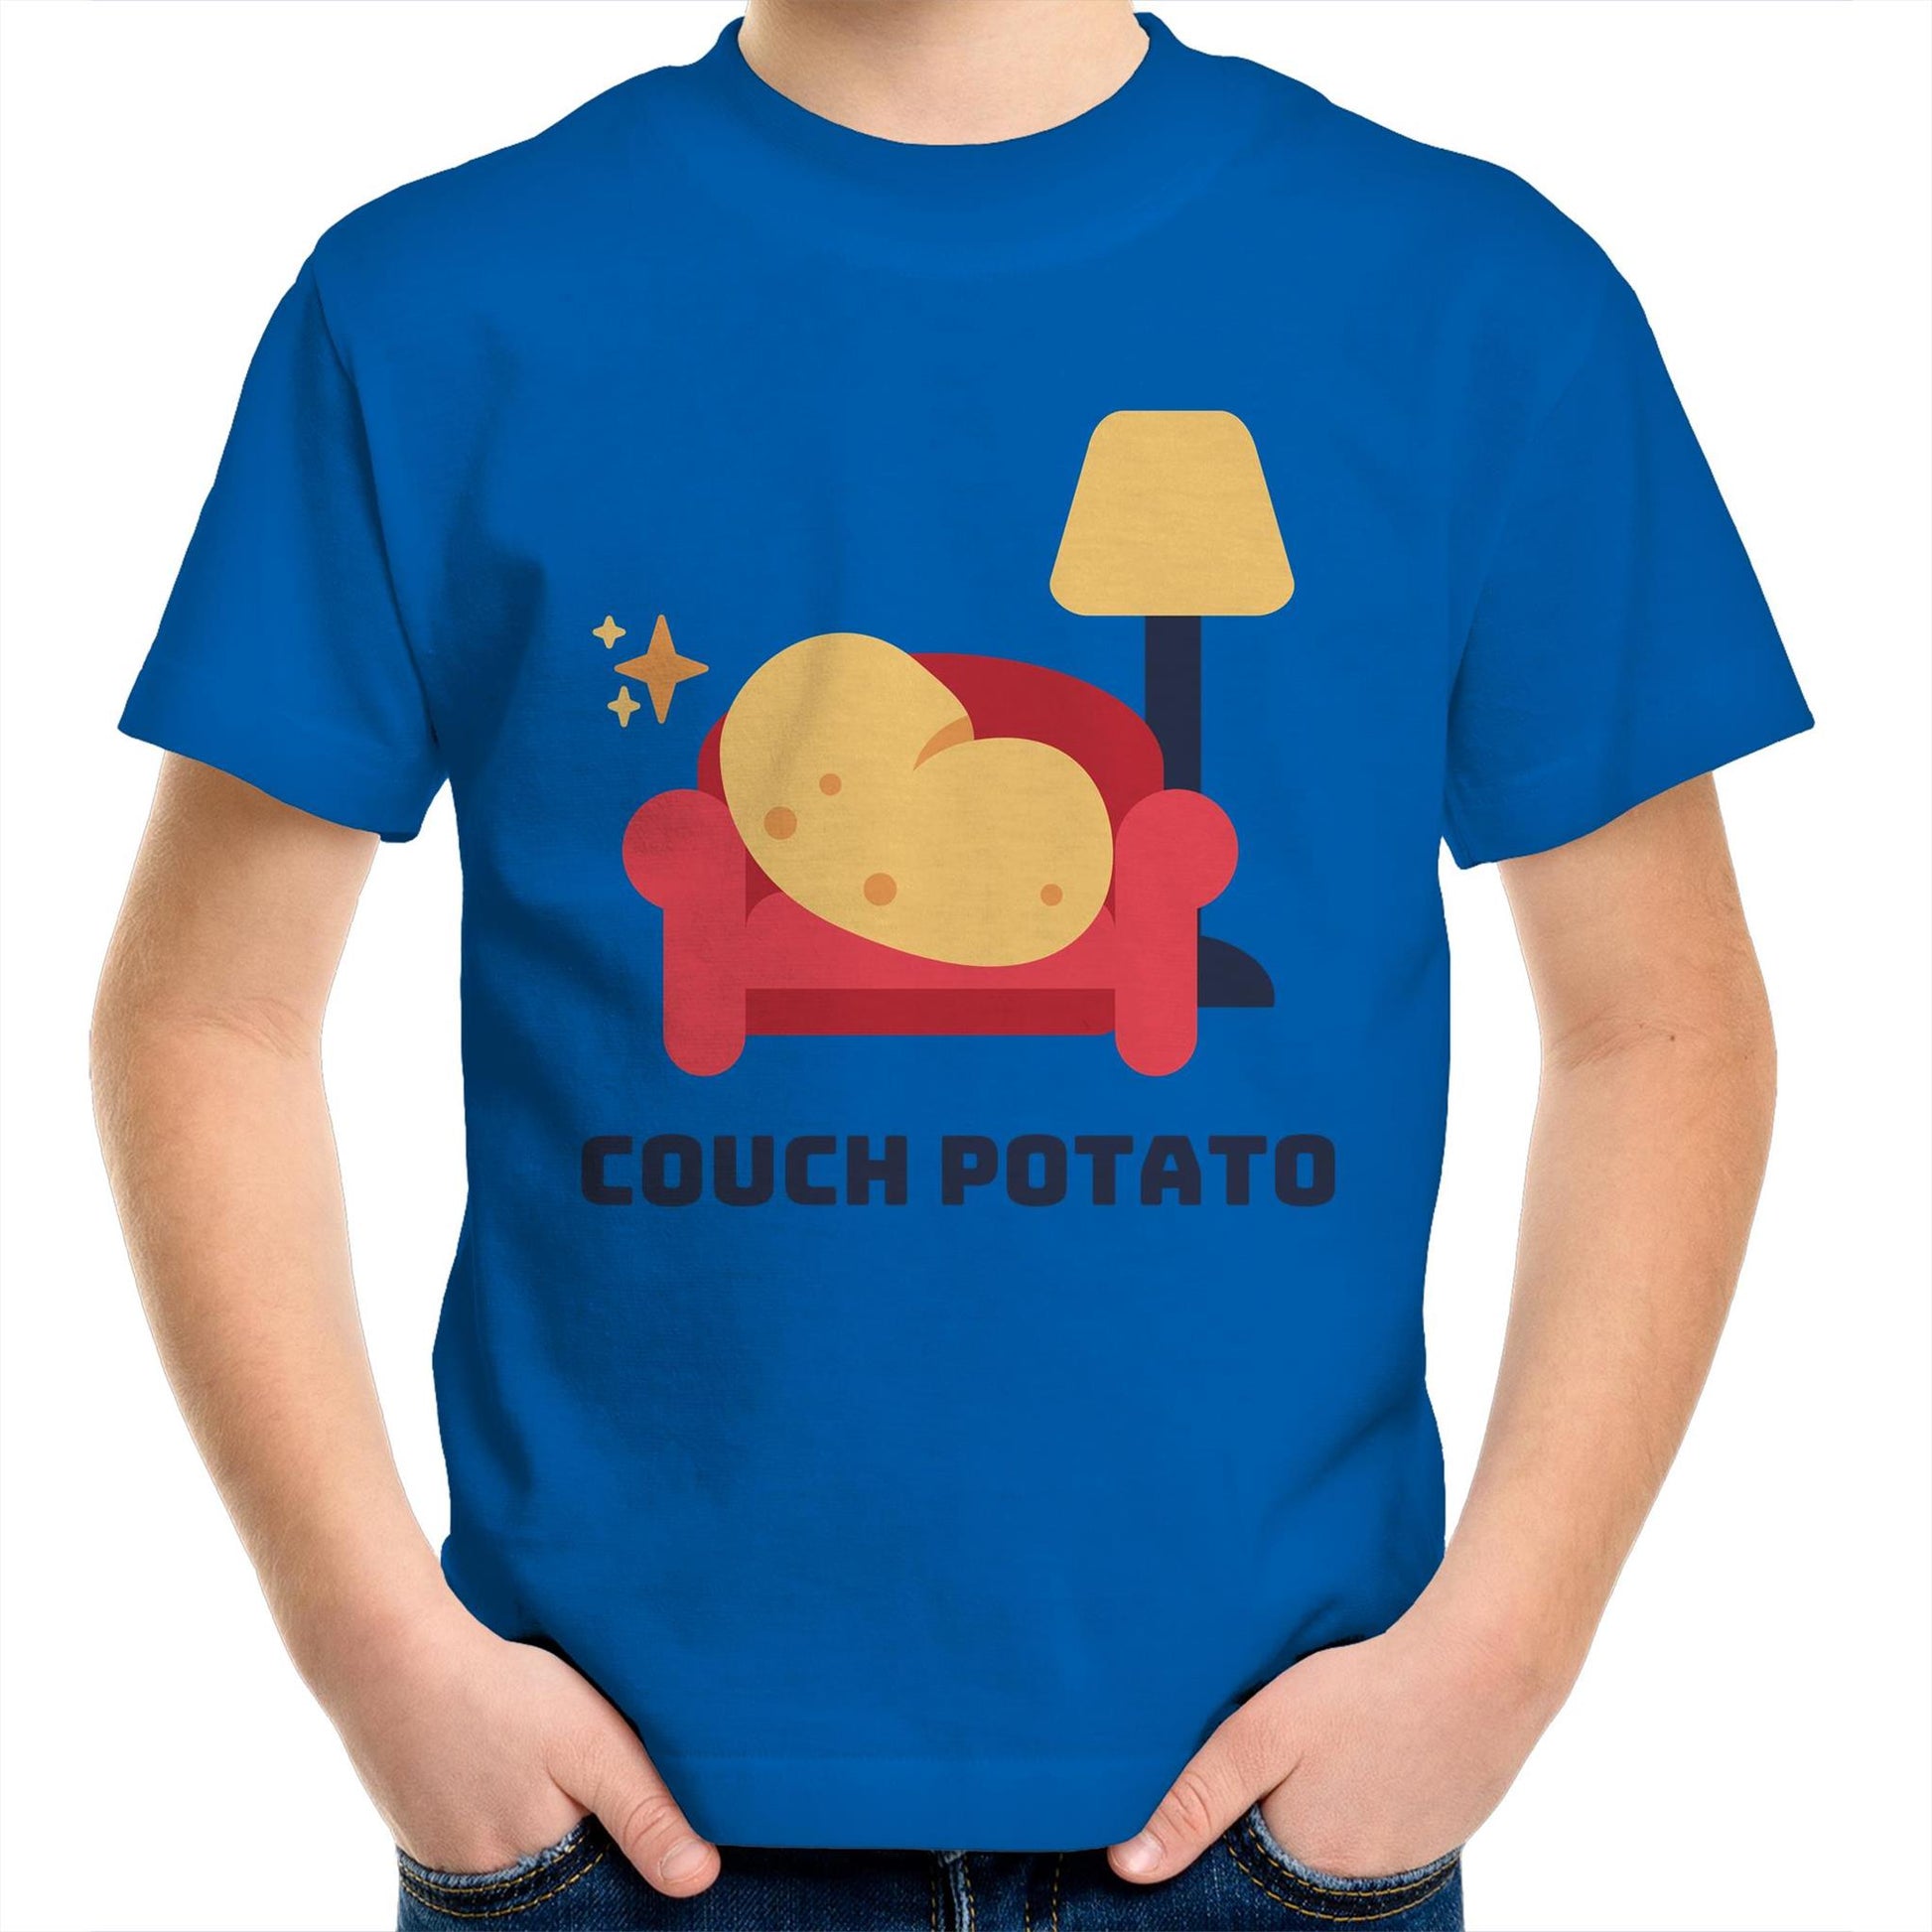 Couch Potato - Kids Youth Crew T-Shirt Bright Royal Kids Youth T-shirt Funny